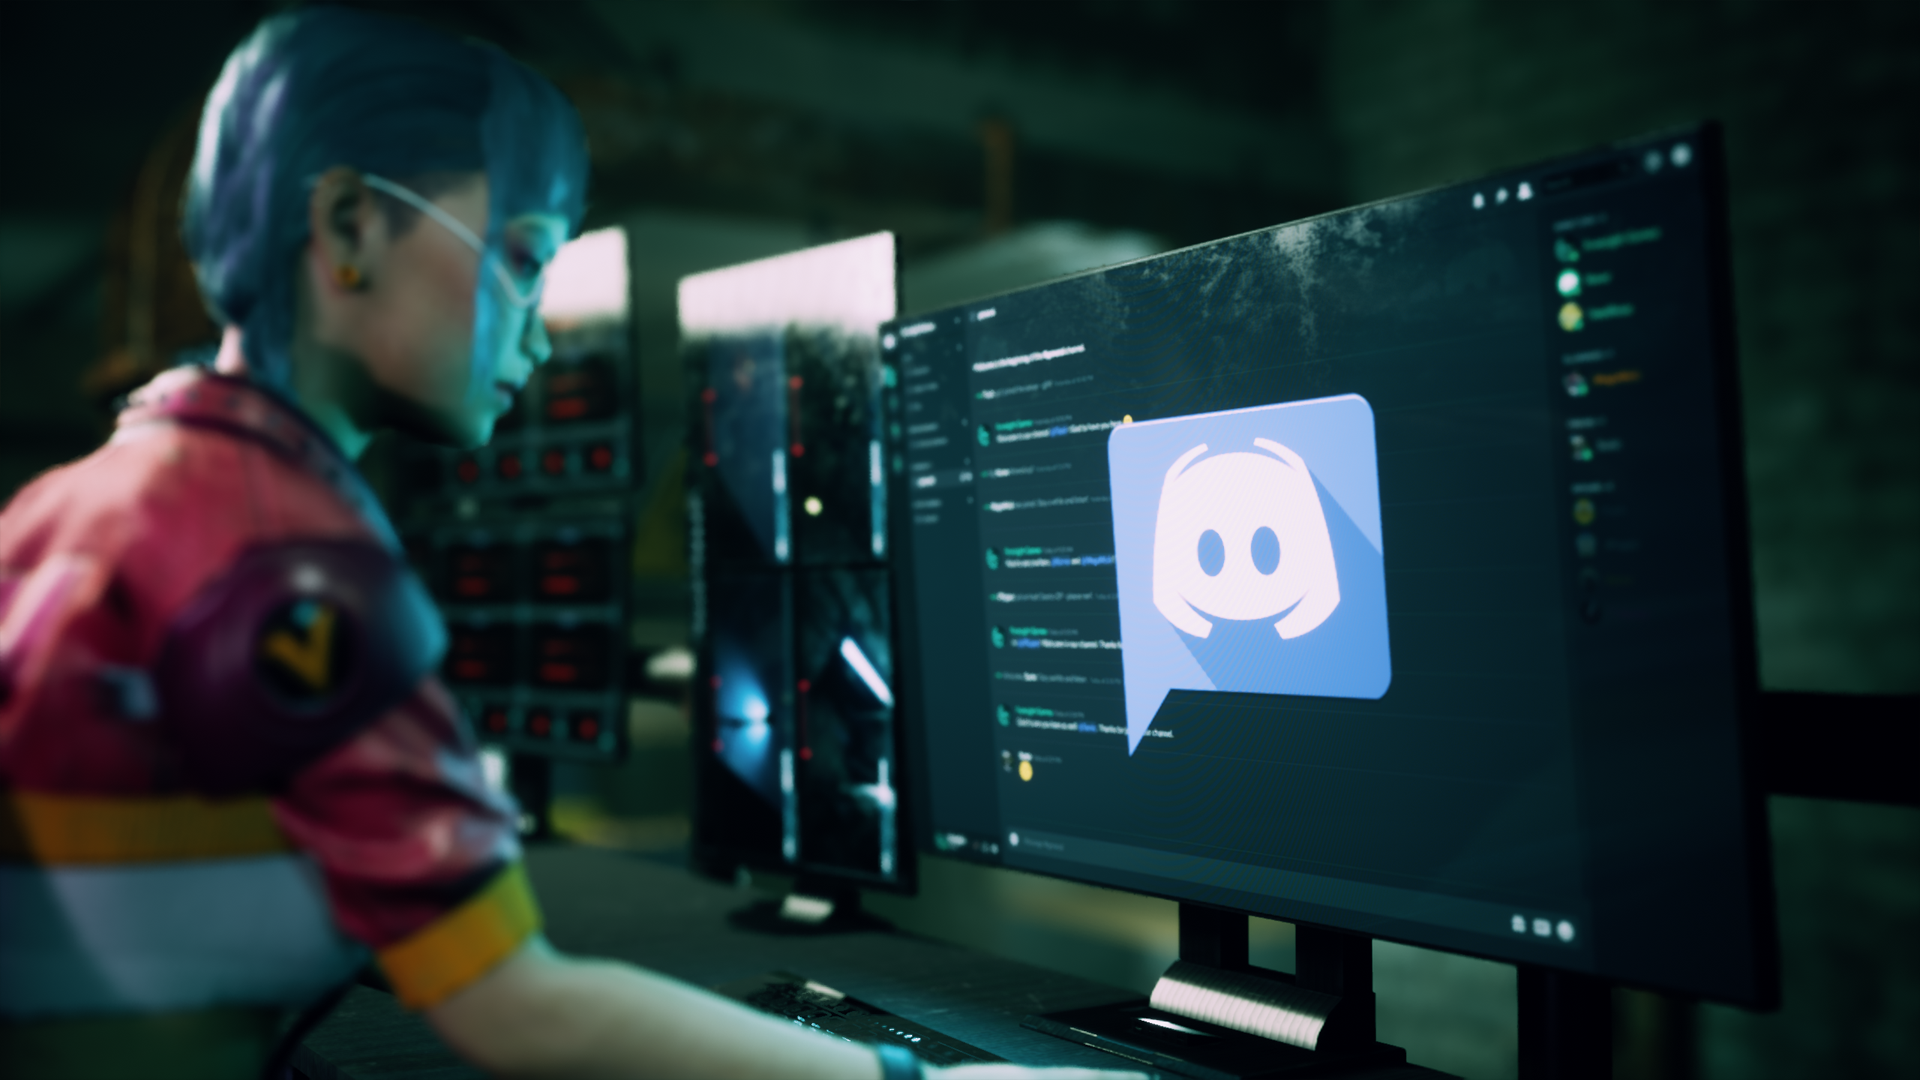 Bubbles at the computer looking at a computer screen with the Discord logo